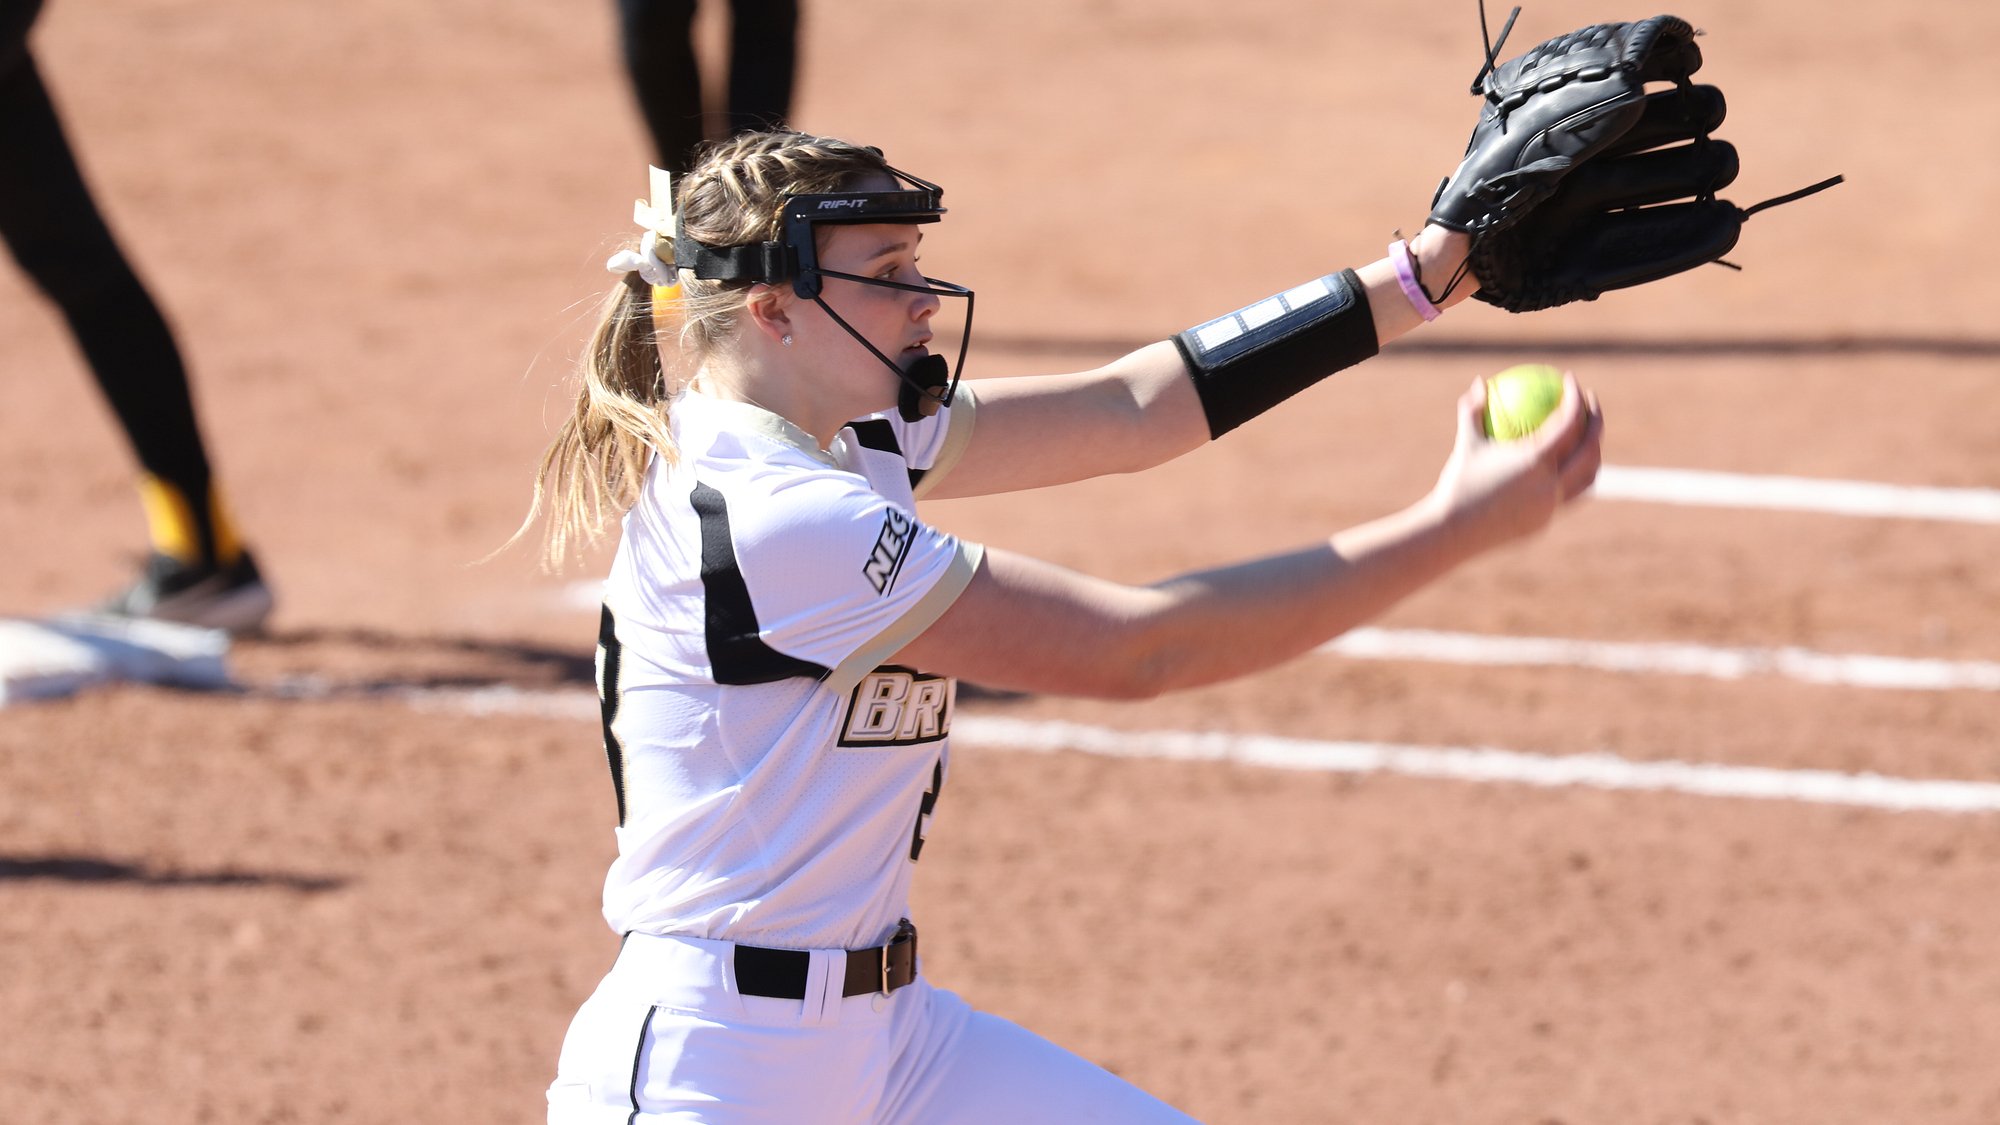 Kenney has a career day on the mound as Bryant splits with LIU on Sunday